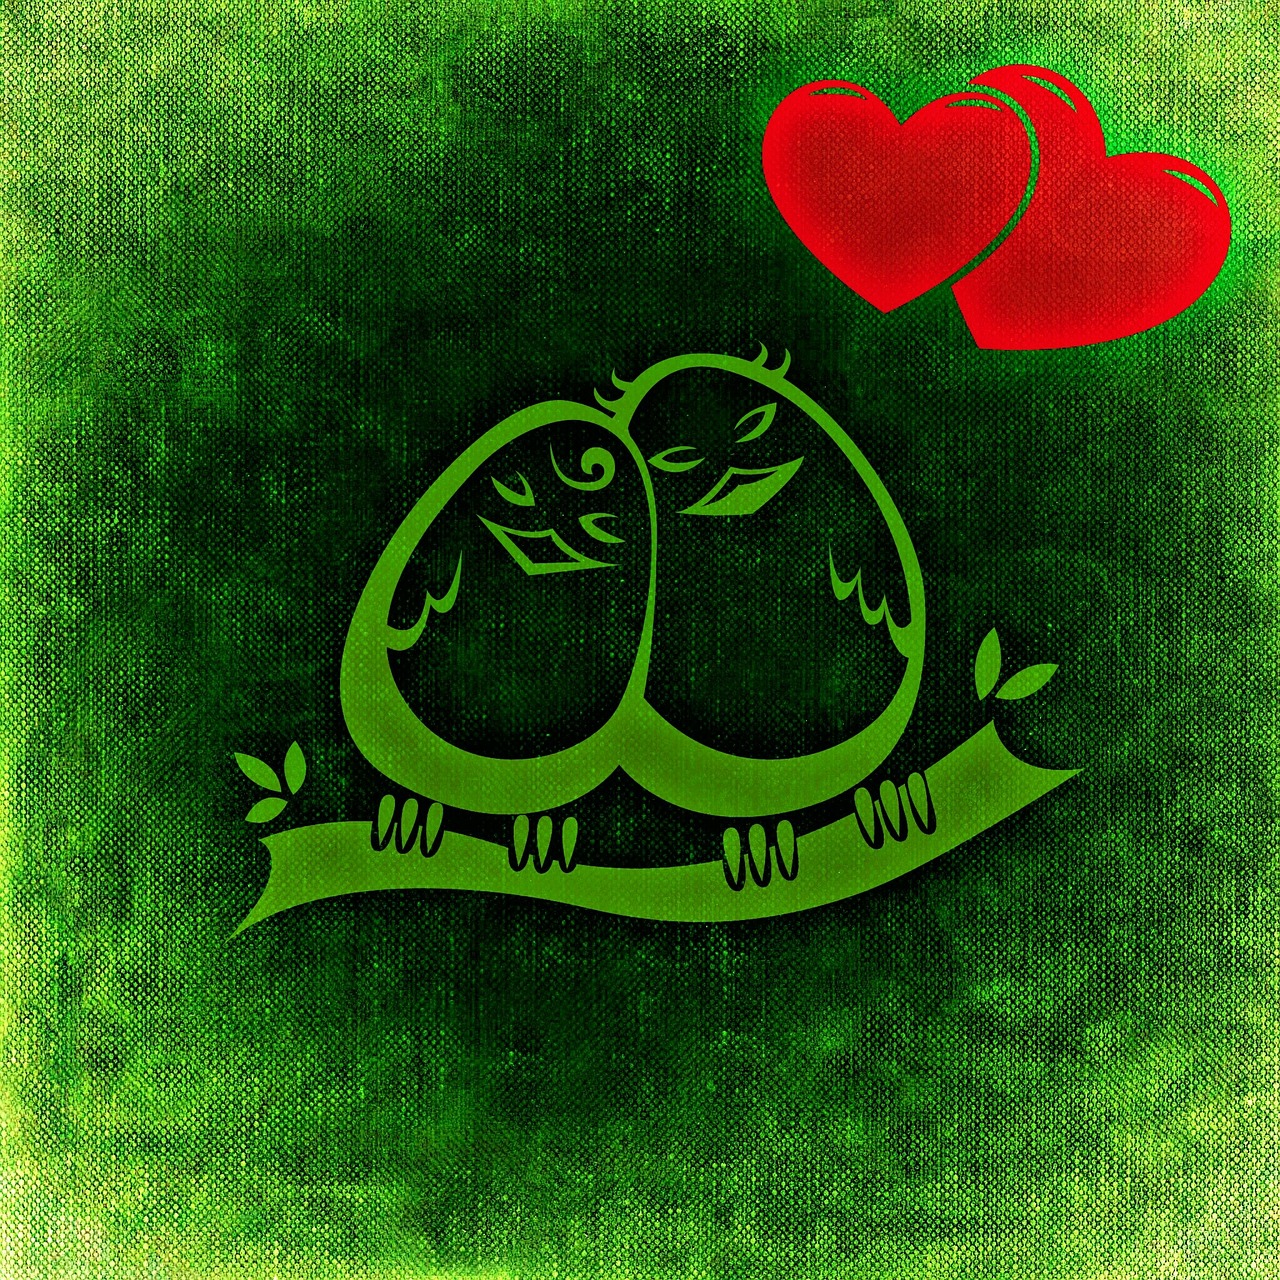 a couple of birds sitting on top of a tree branch, a digital rendering, folk art, constant green background, hearts symbol, 7 0 s photo